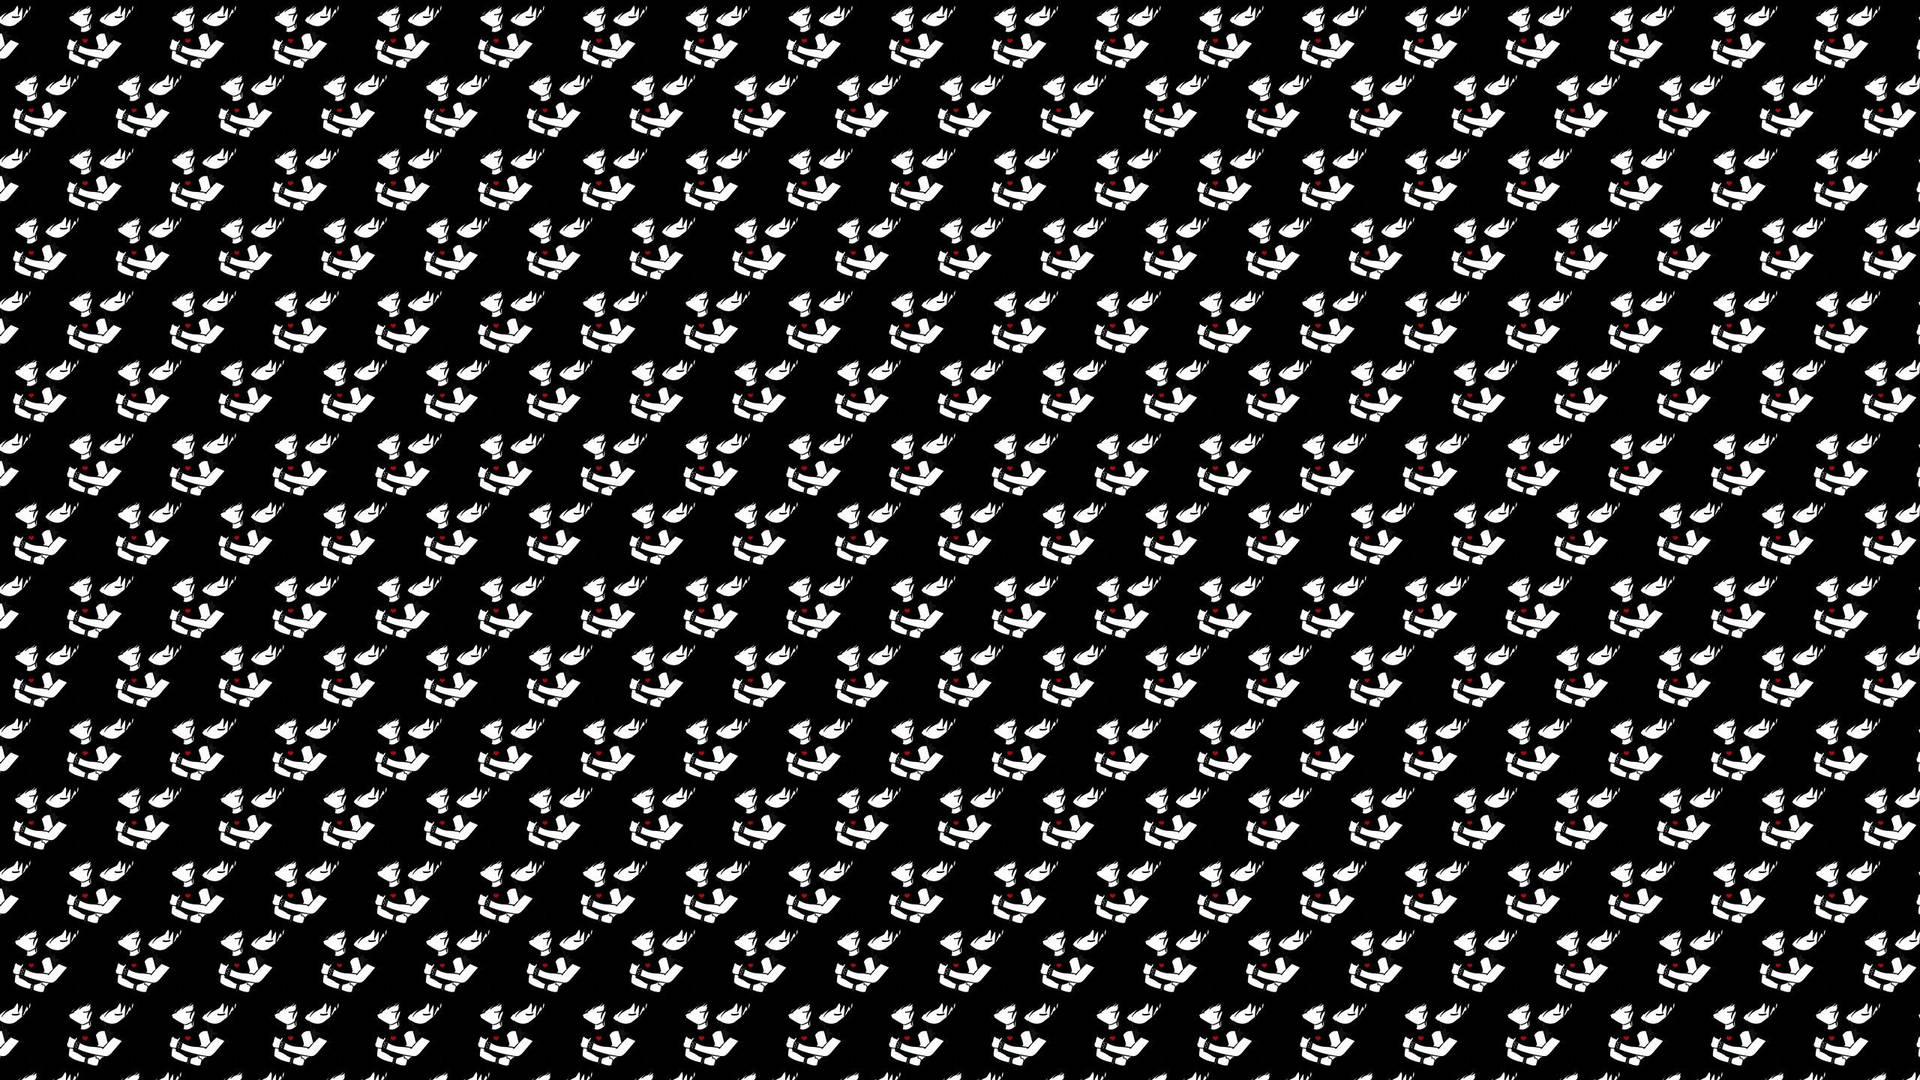 Patterned Emo Couple Background